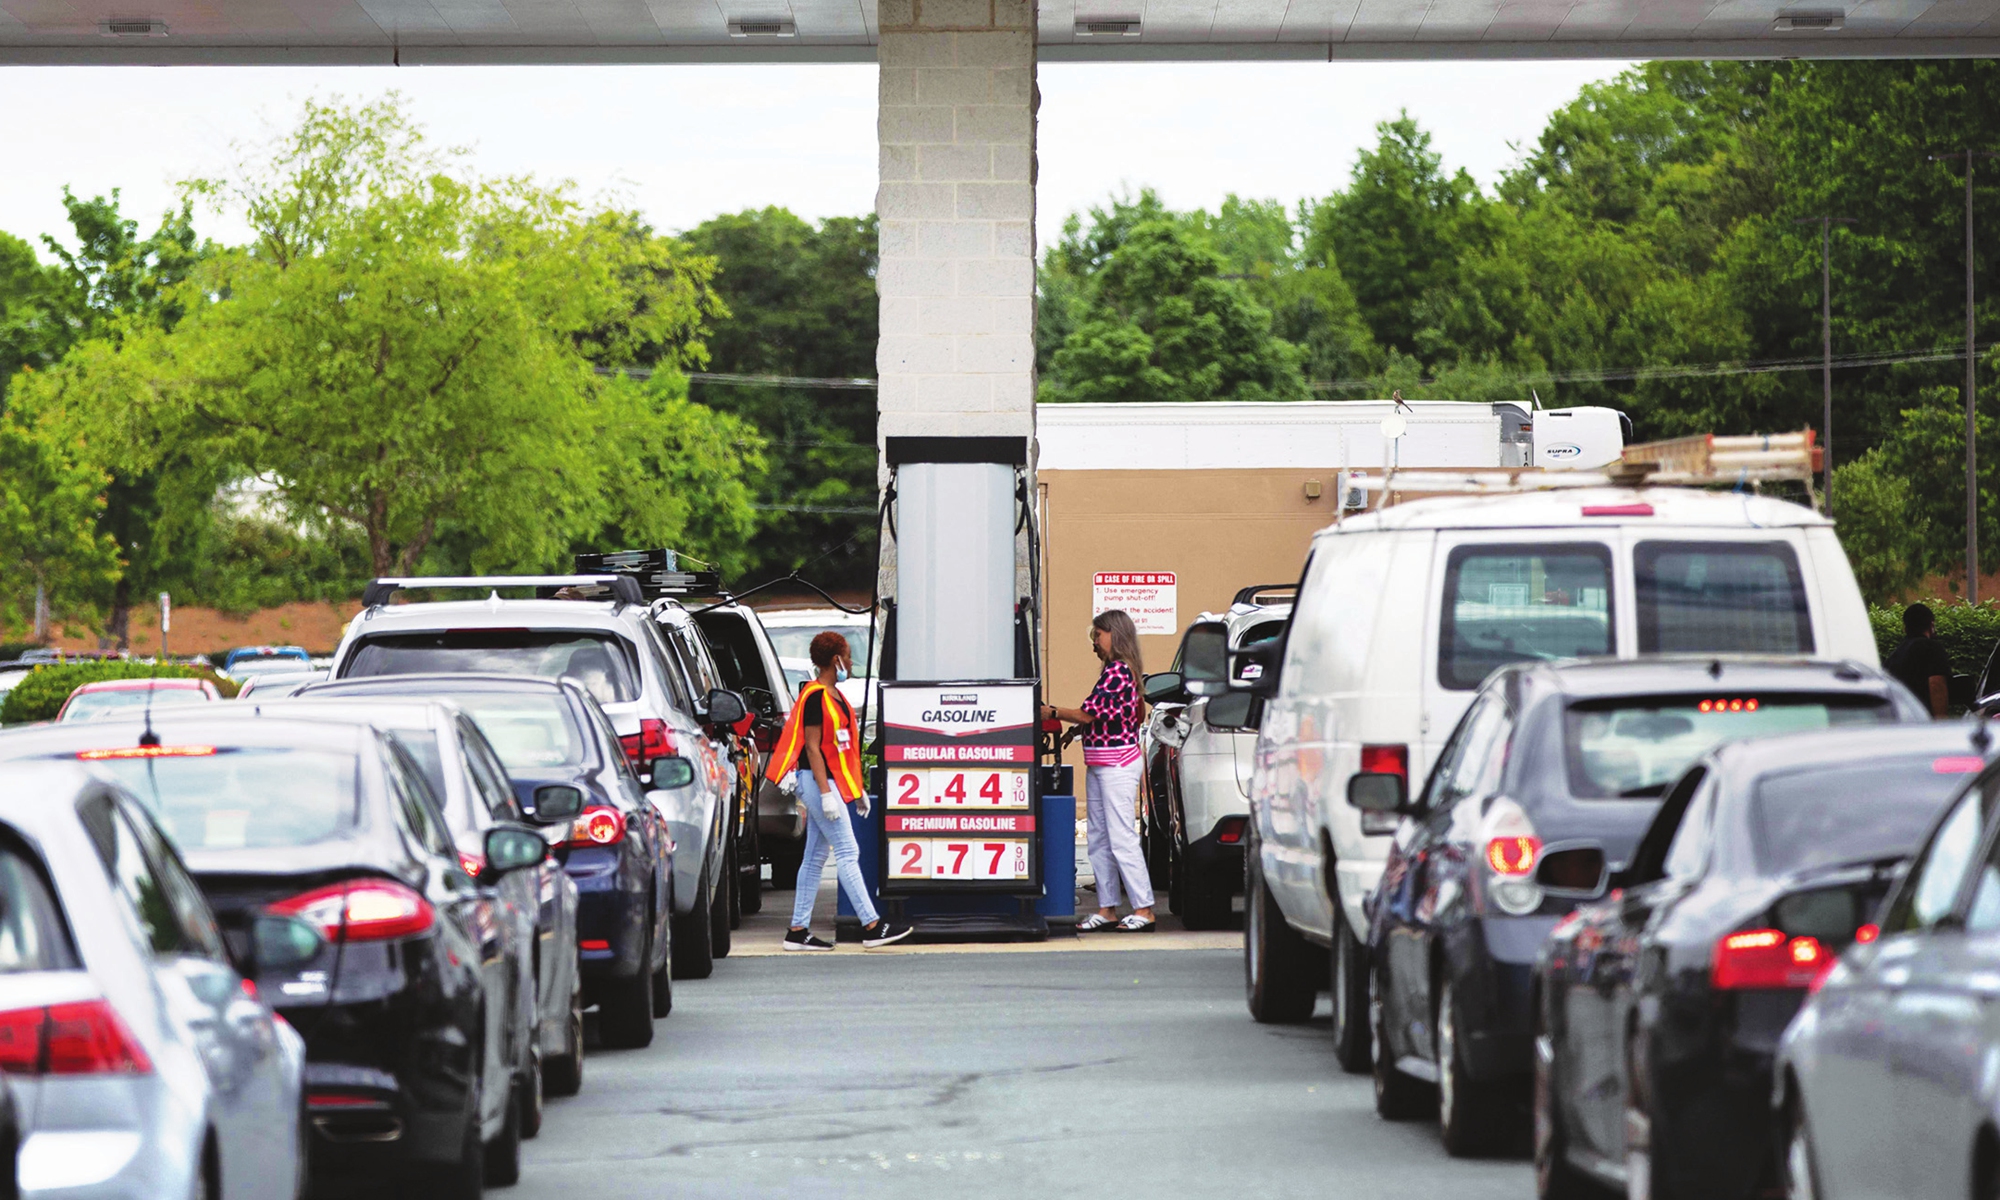 Cars line up at a Costco gasoline station on Wednesday in Atlanta, Georgia due to an expected gasoline shortage after Georgia-based gas company Colonial Pipeline reported a ransomware attack on May 7. Photo: Xinhua